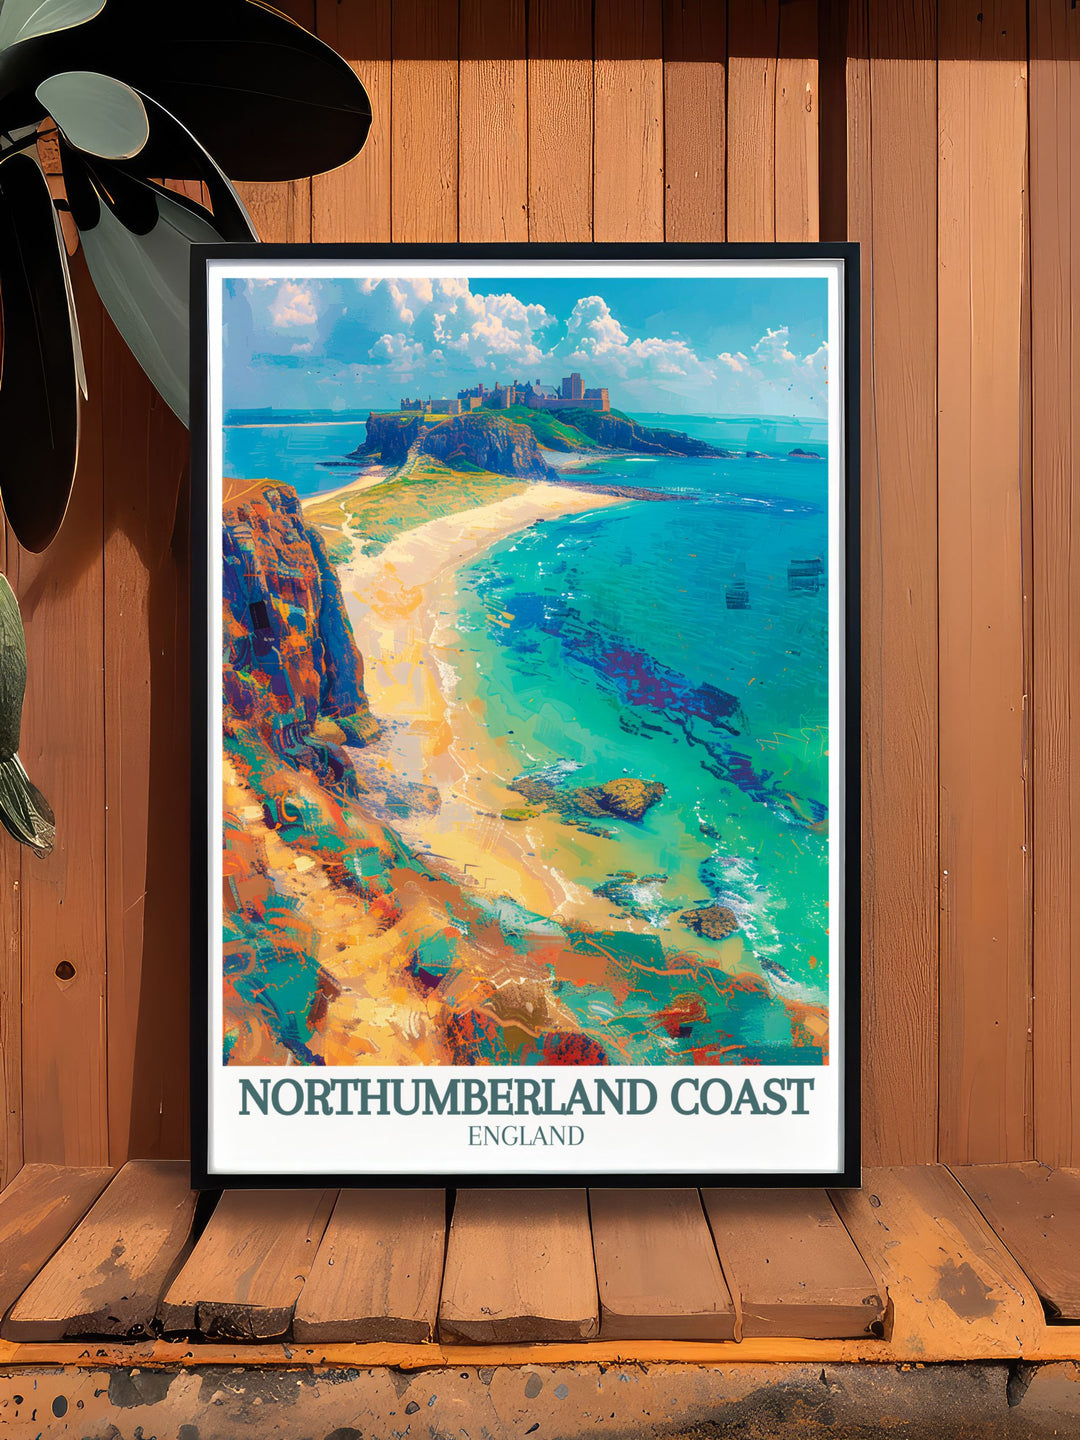 Framed print of Bamburgh Castle and Dunstanburgh Castle set against the rugged Northumberland Coast ideal for those who appreciate the regions natural beauty and historical significance a perfect addition to any home decor.